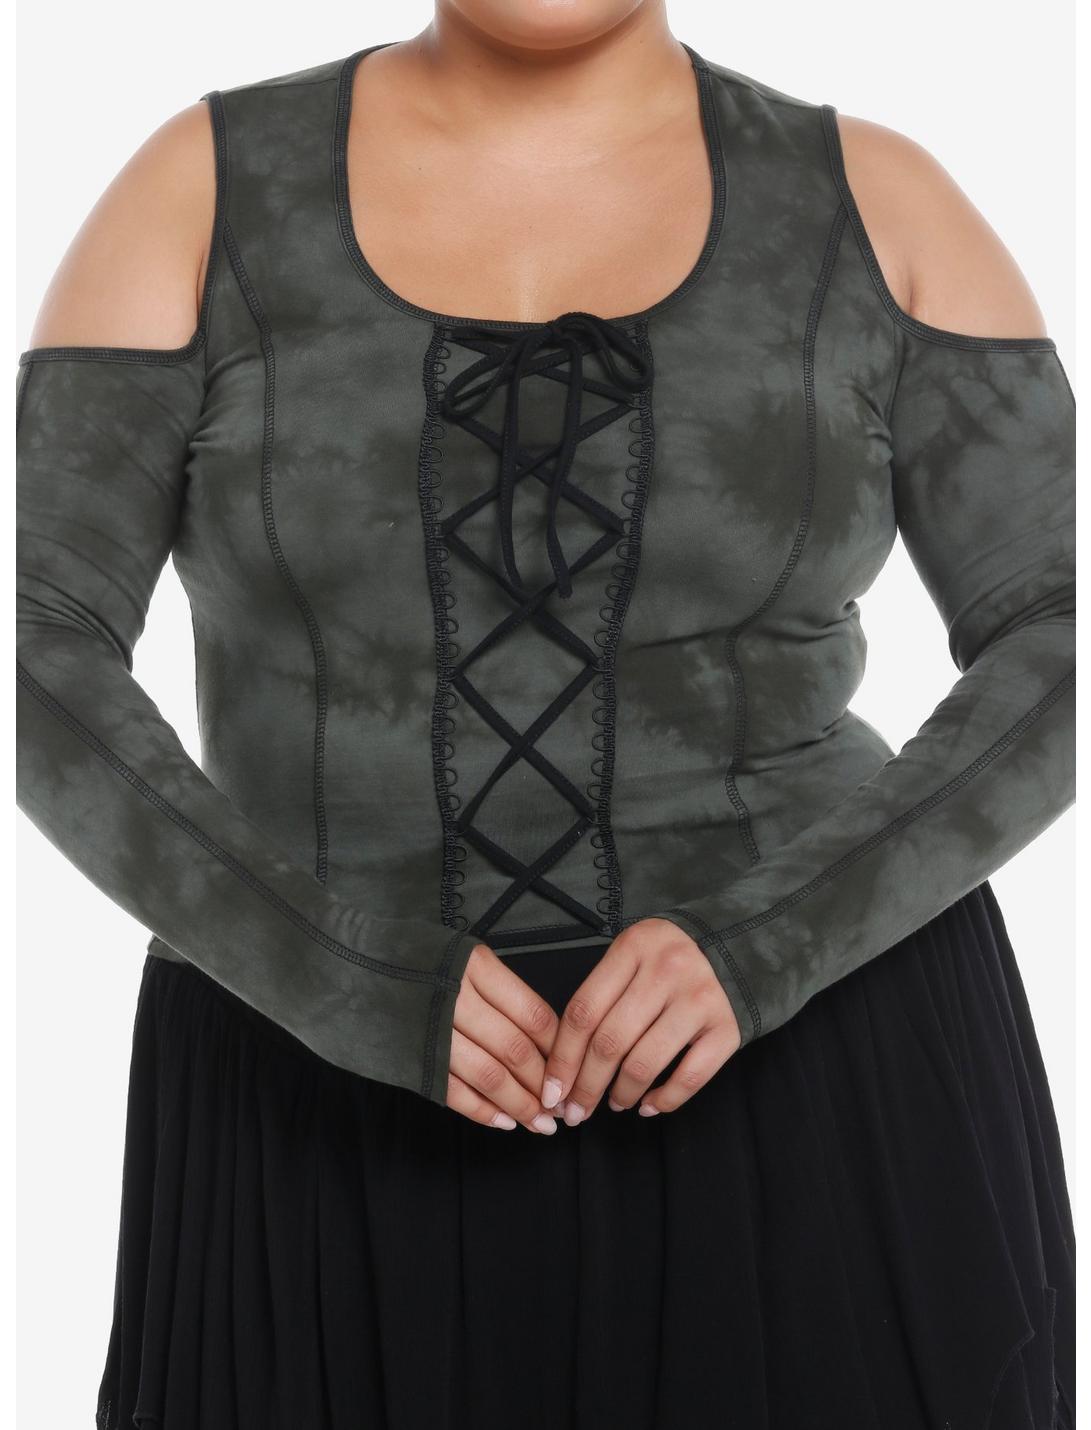 Thorn & Fable Dark Green Tie-Dye Lace-Up Girls Cold Shoulder Top Plus Size, GREEN, hi-res